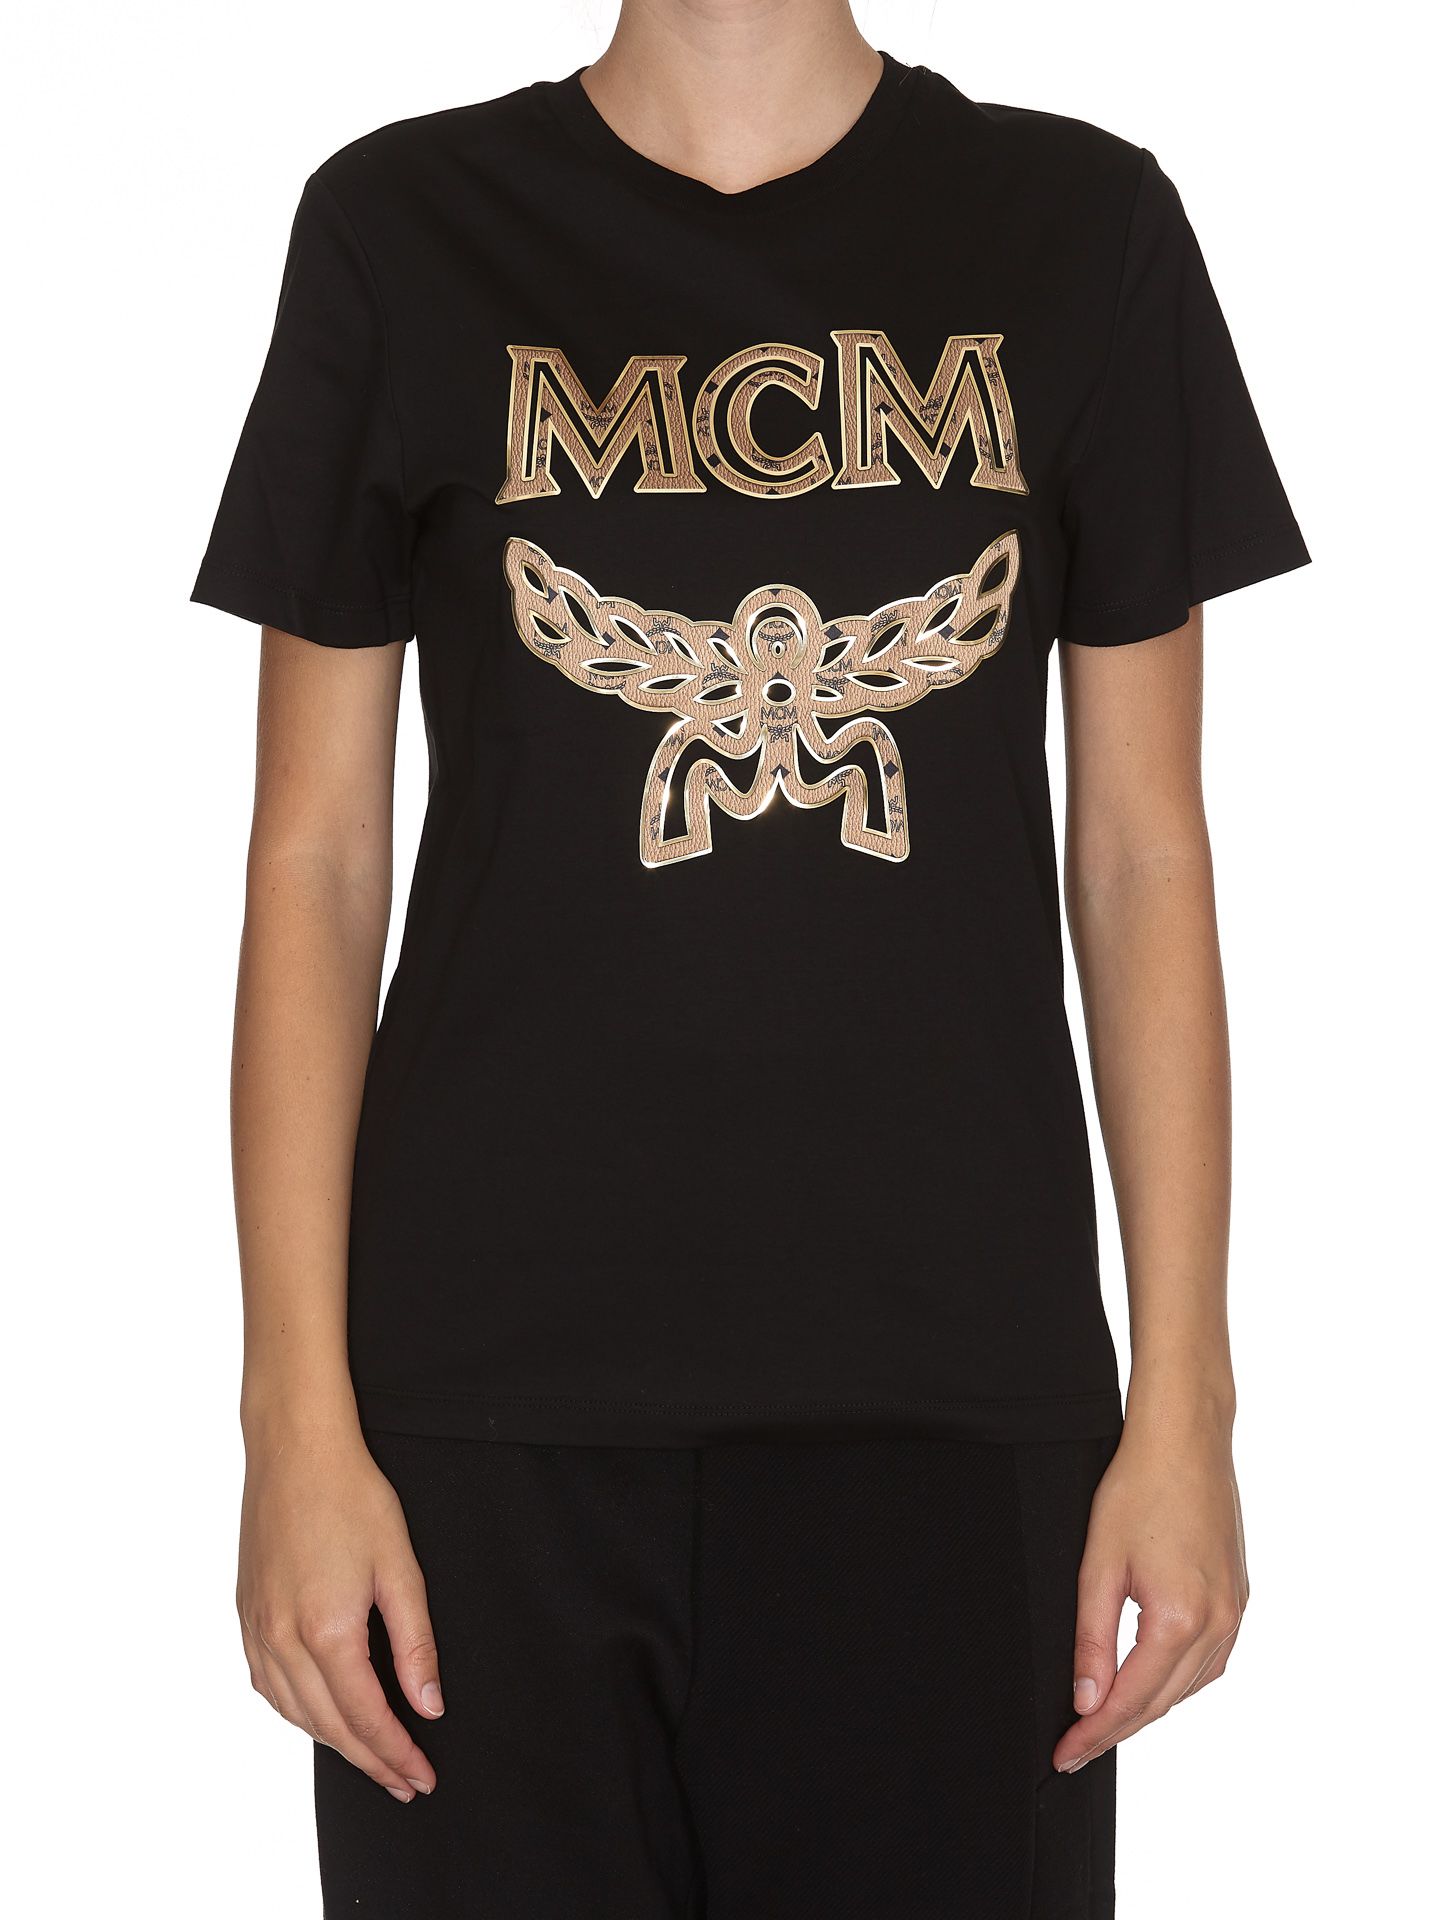 Shop MCM Clothing and Apparel For Women | ModeSens